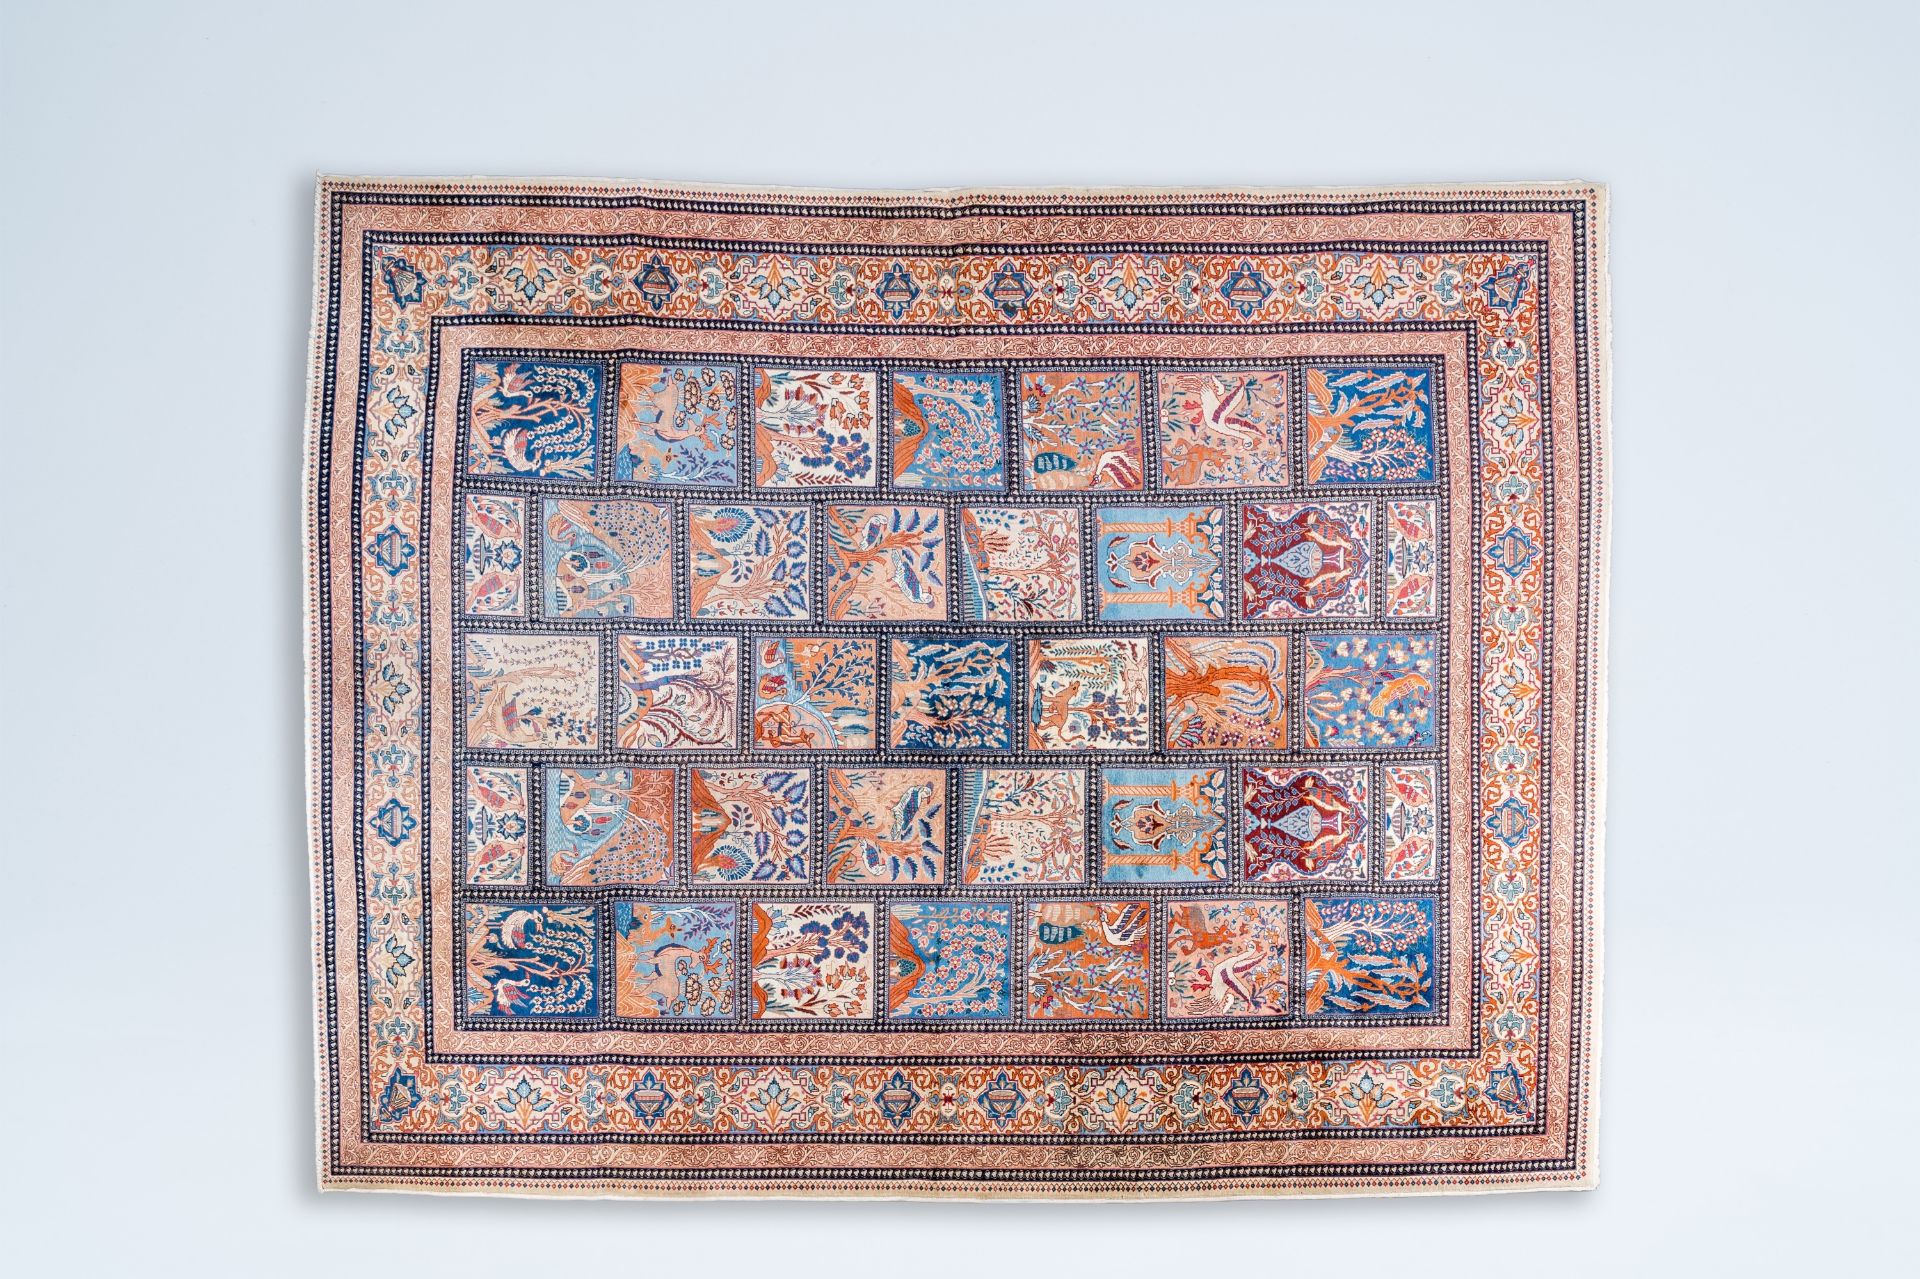 A Persian Bakhtiari rug with animals and floral design, wool on cotton, Iran, 20th C.